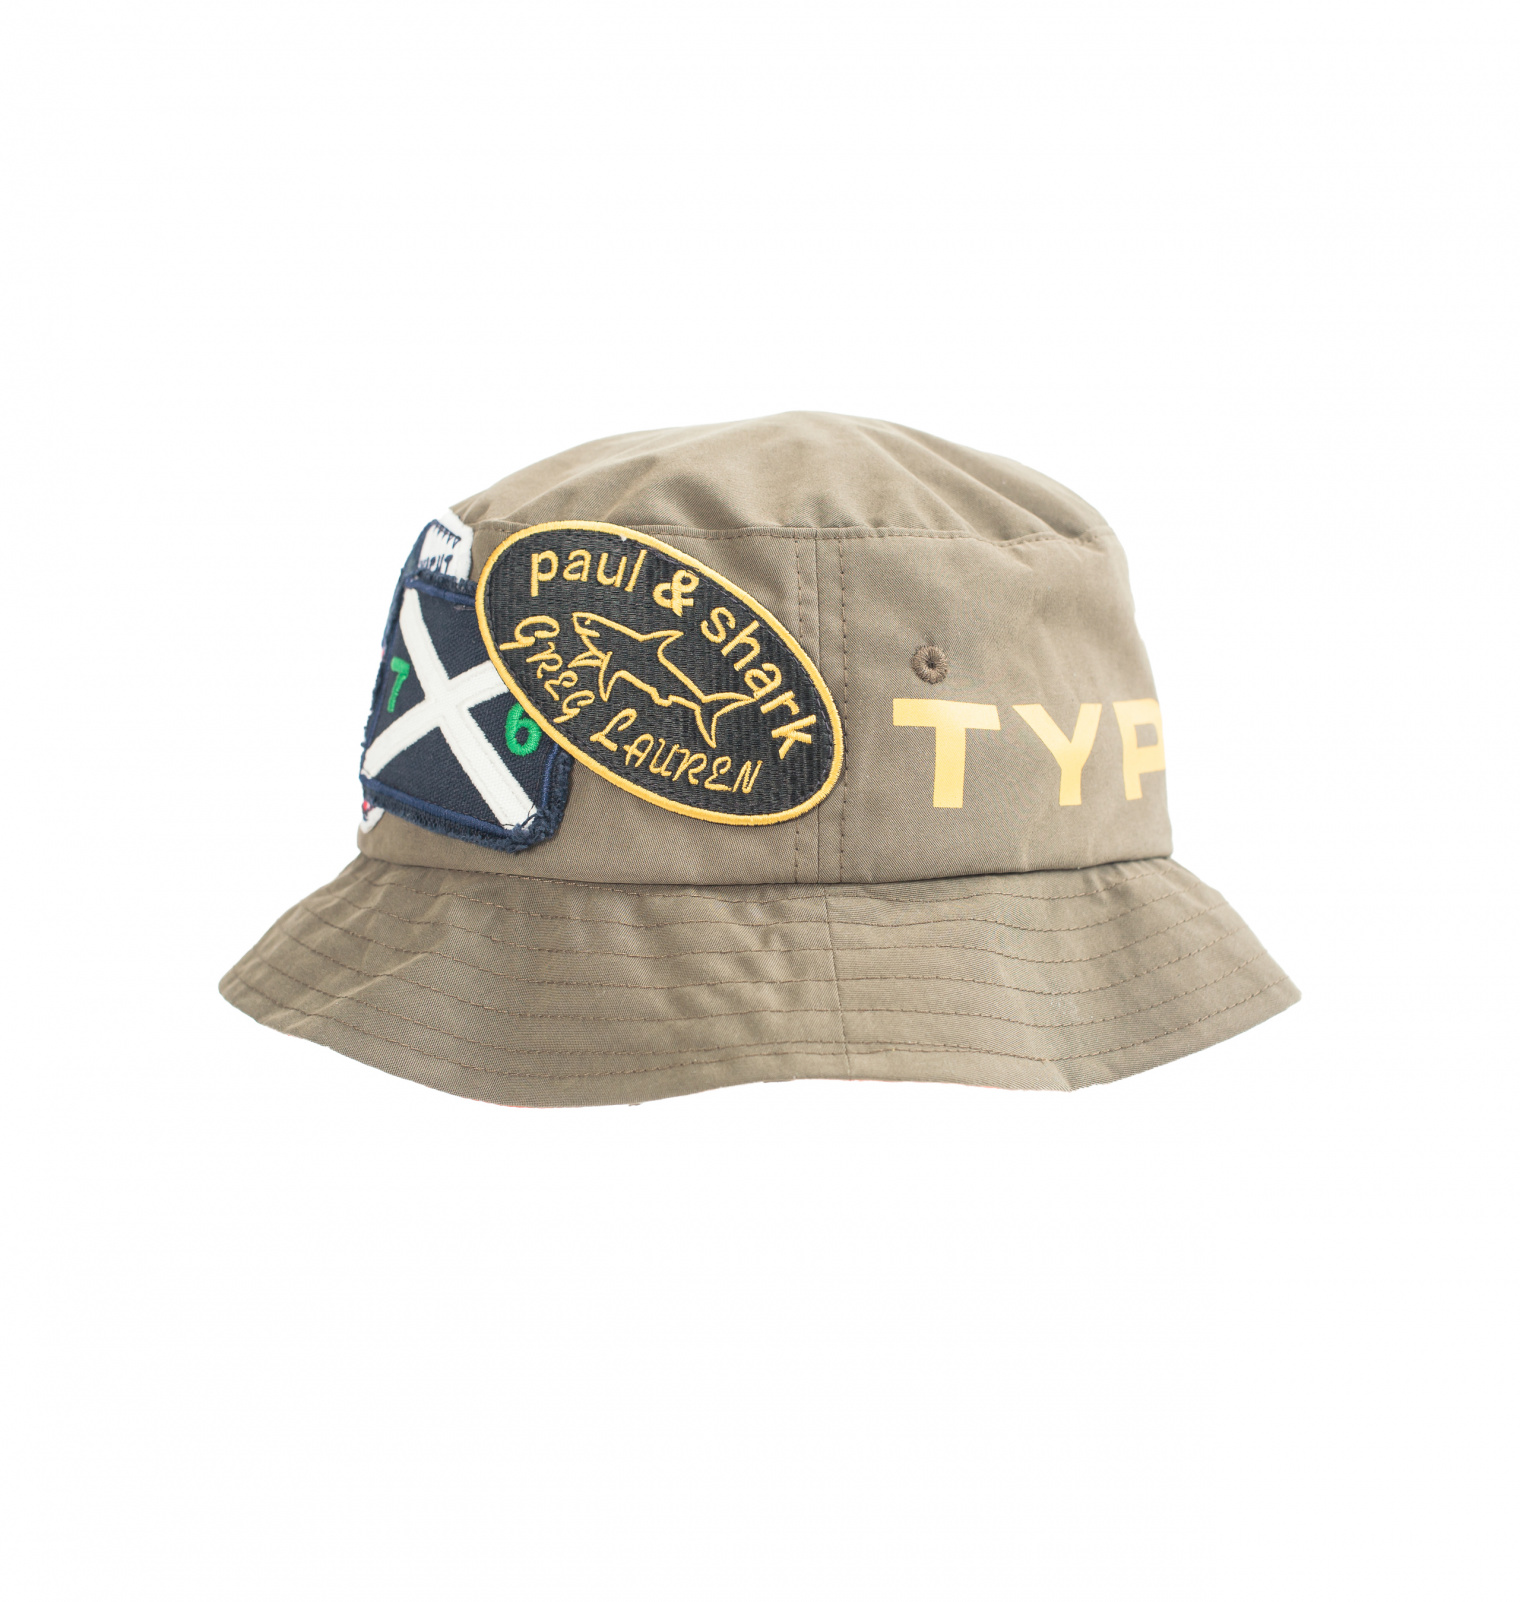 Greg Lauren Green Hat With Patches